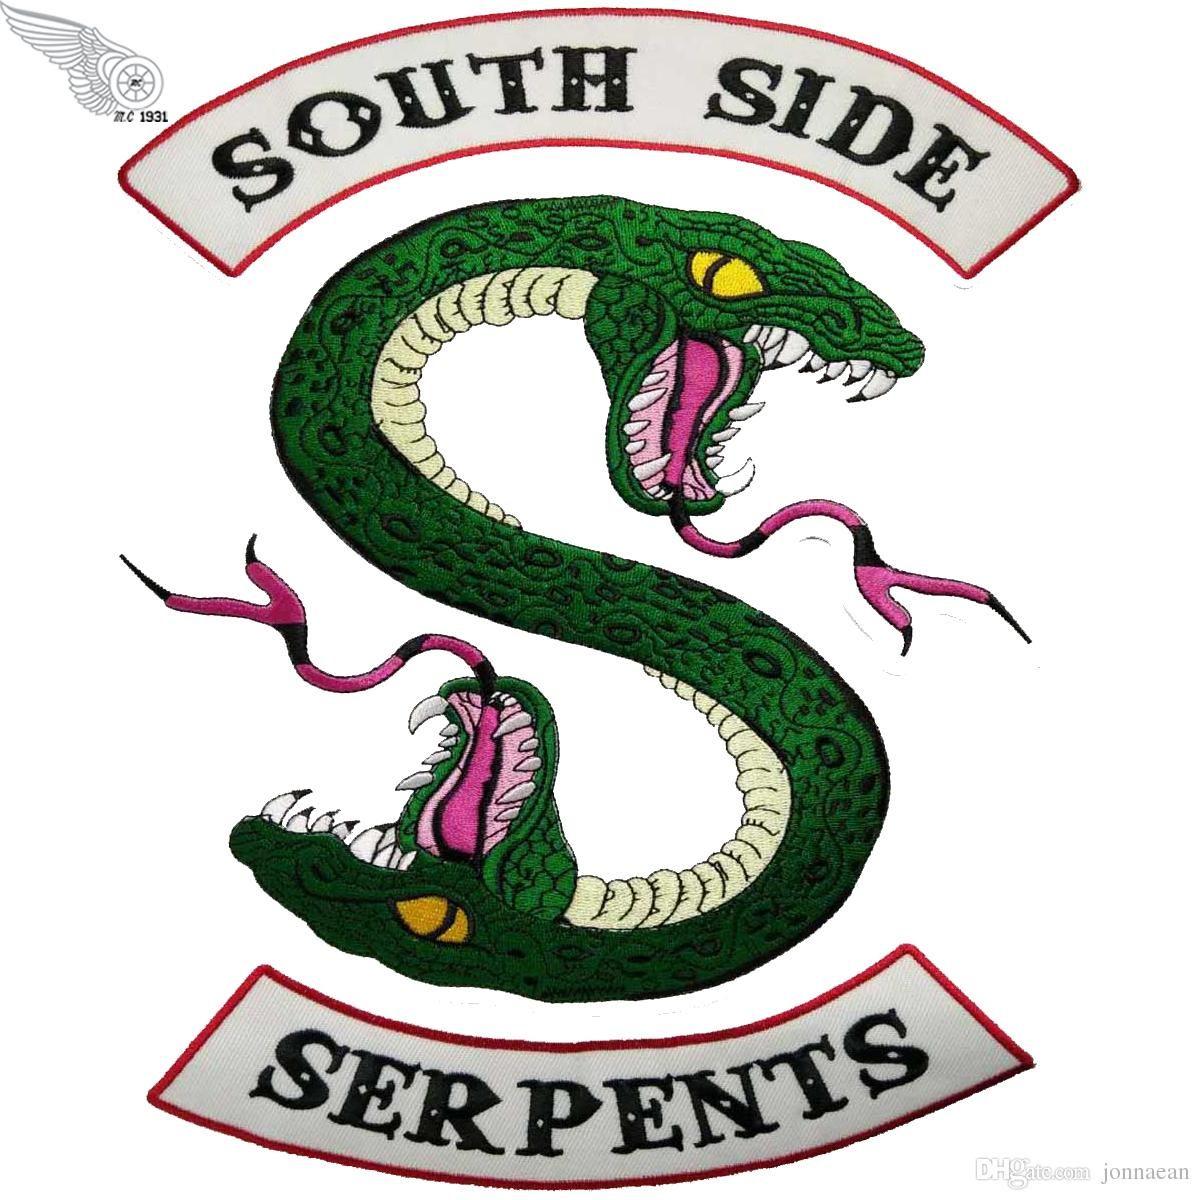 Cool Snake Logo - Cool South Side Green Snake Patch Embroidery Iron on Biker ...